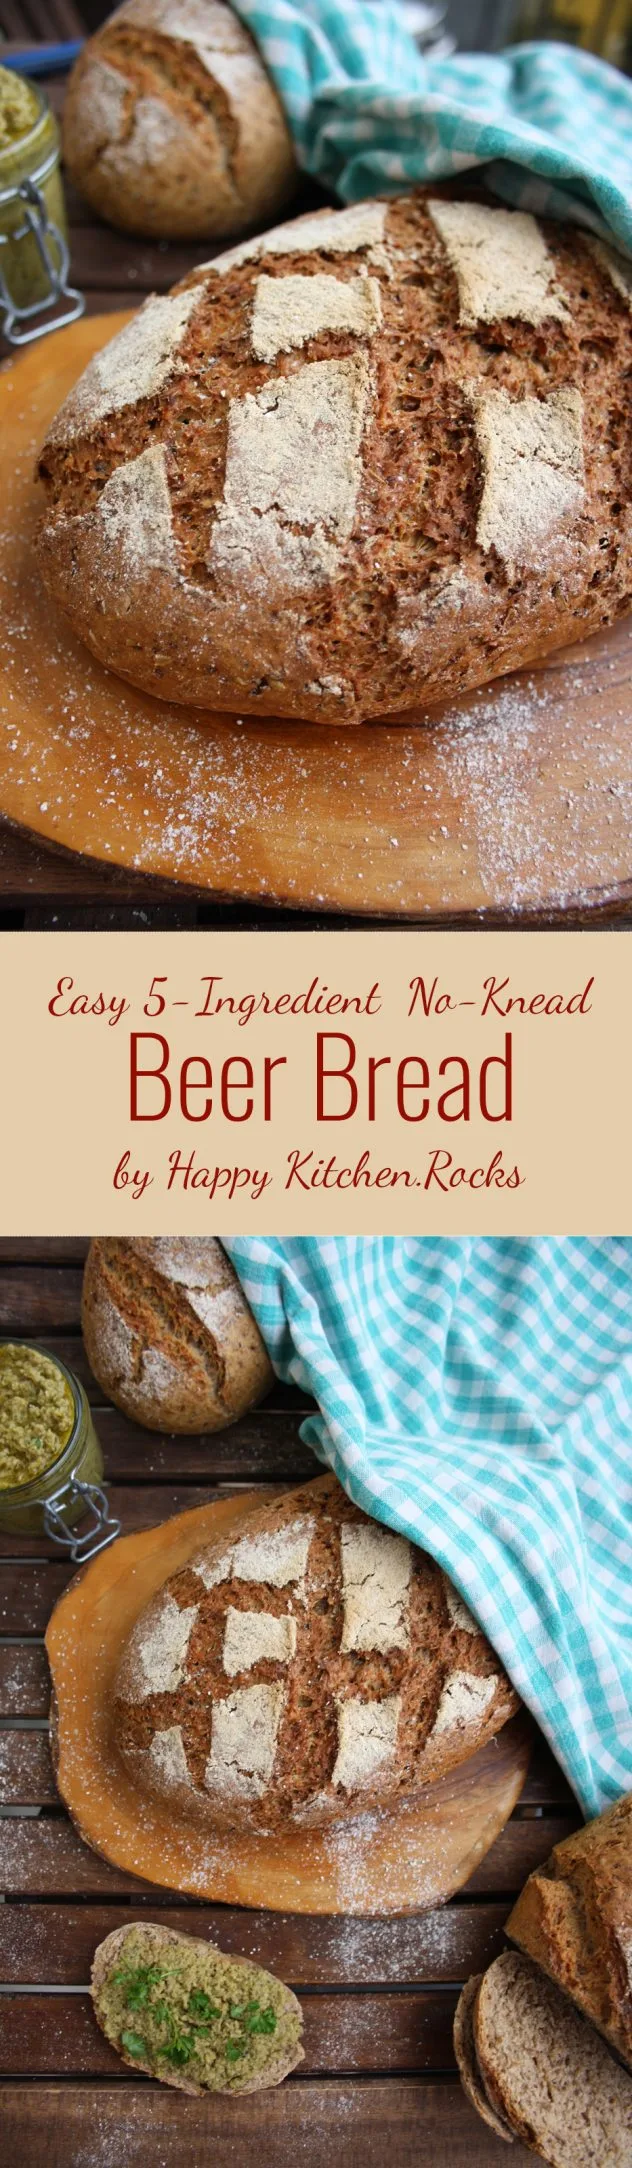 Easy and crusty no-knead 5-ingredient beer bread recipe. Sweet, delicious, healthy and nutritious bread with a little prickliness.